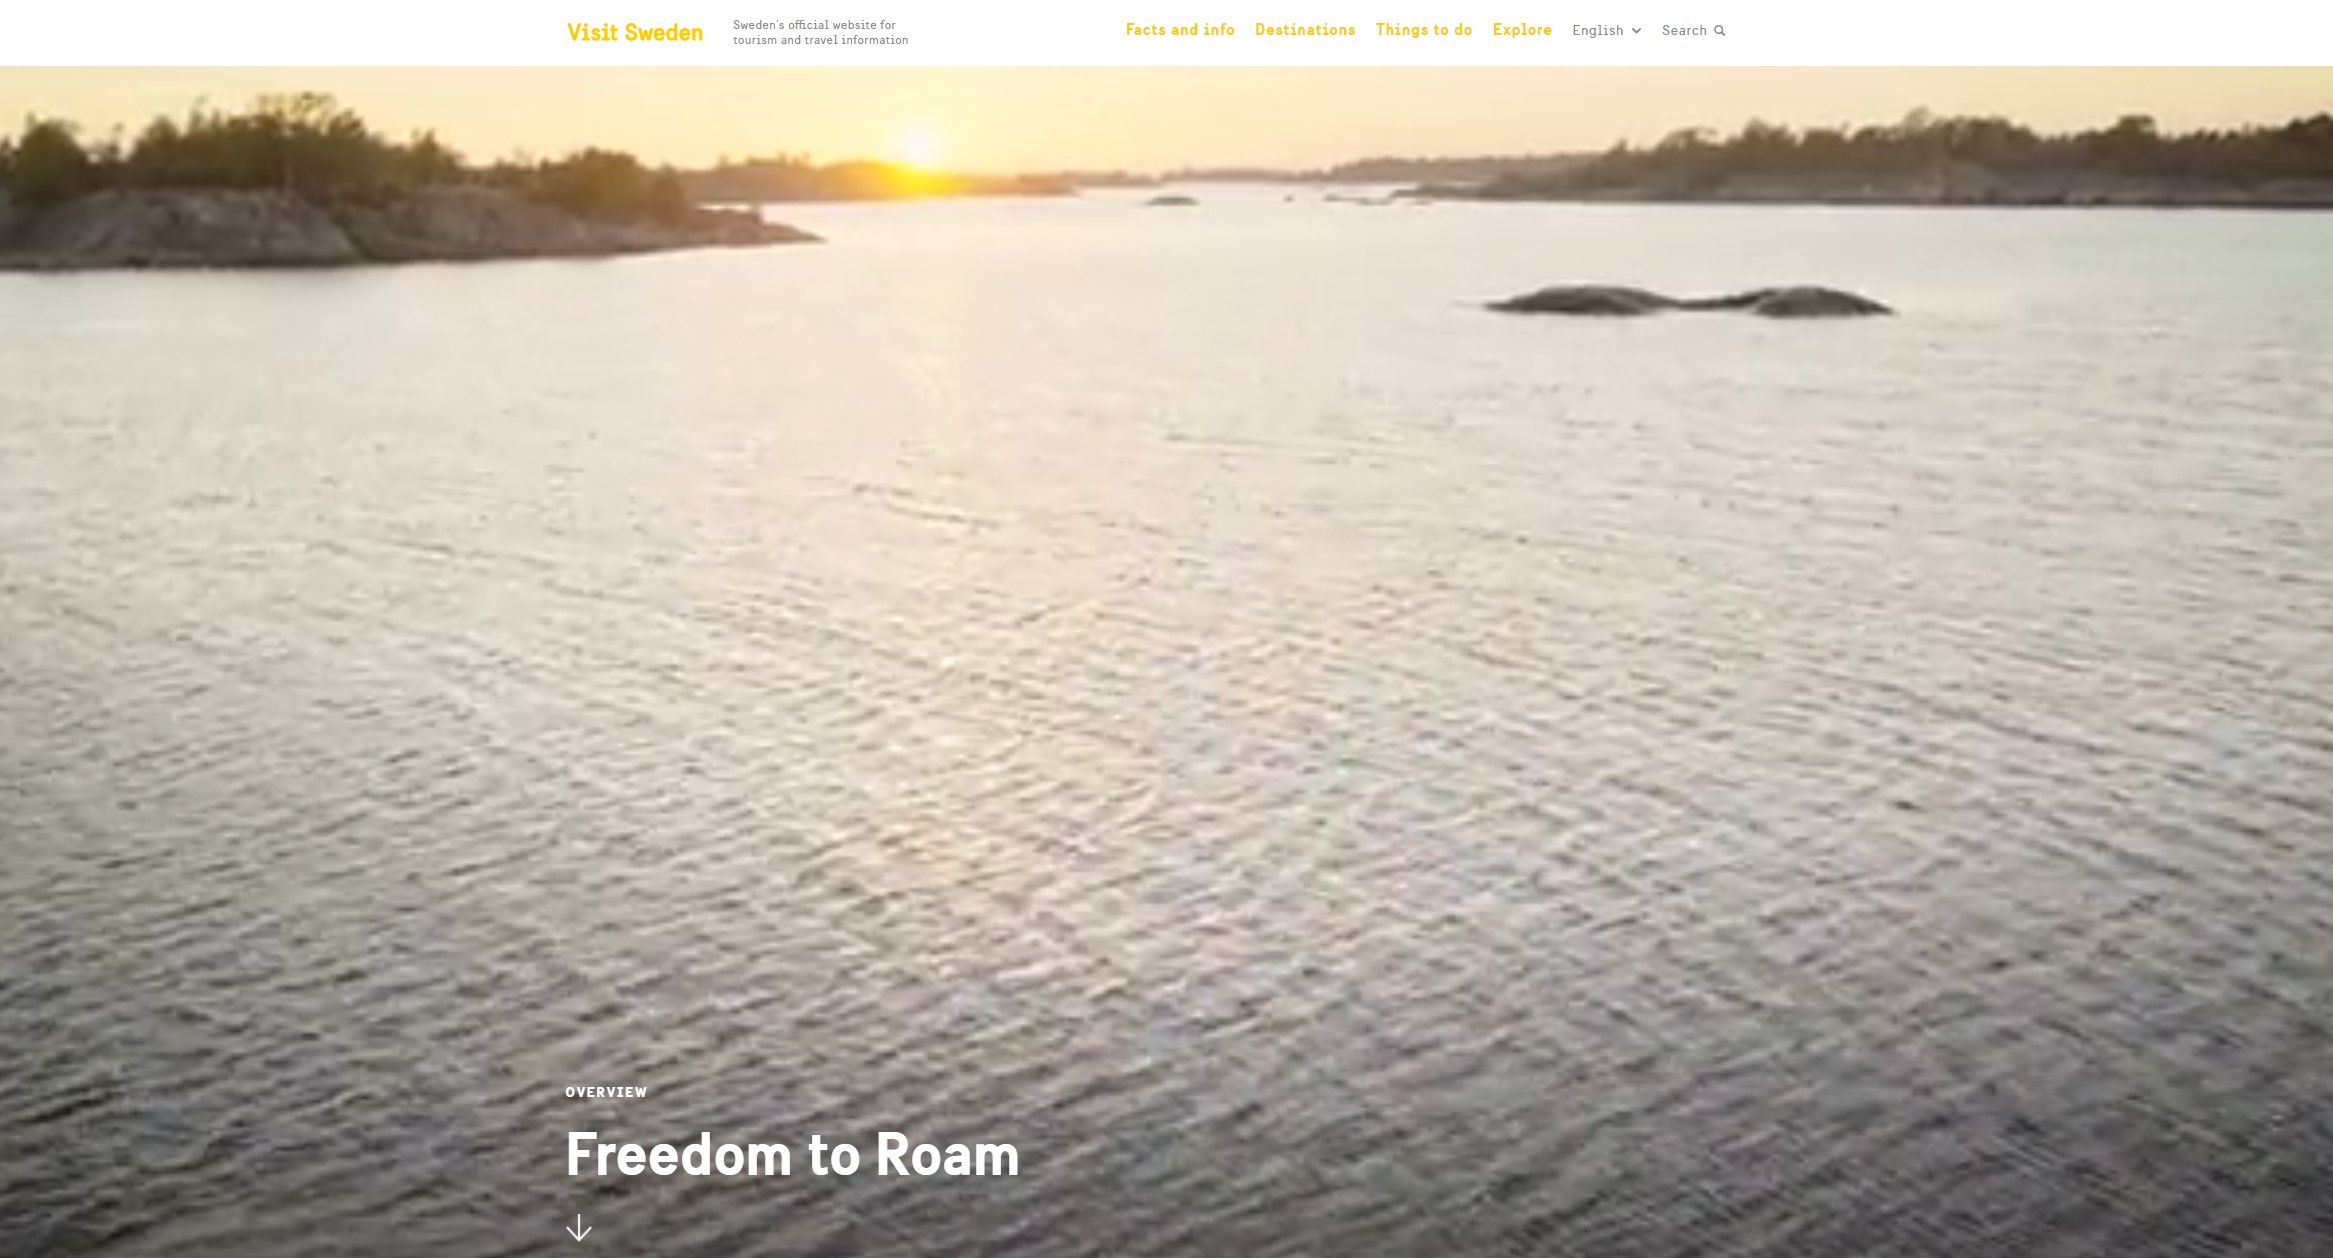 Sweden Lists Entire Country on Airbnb